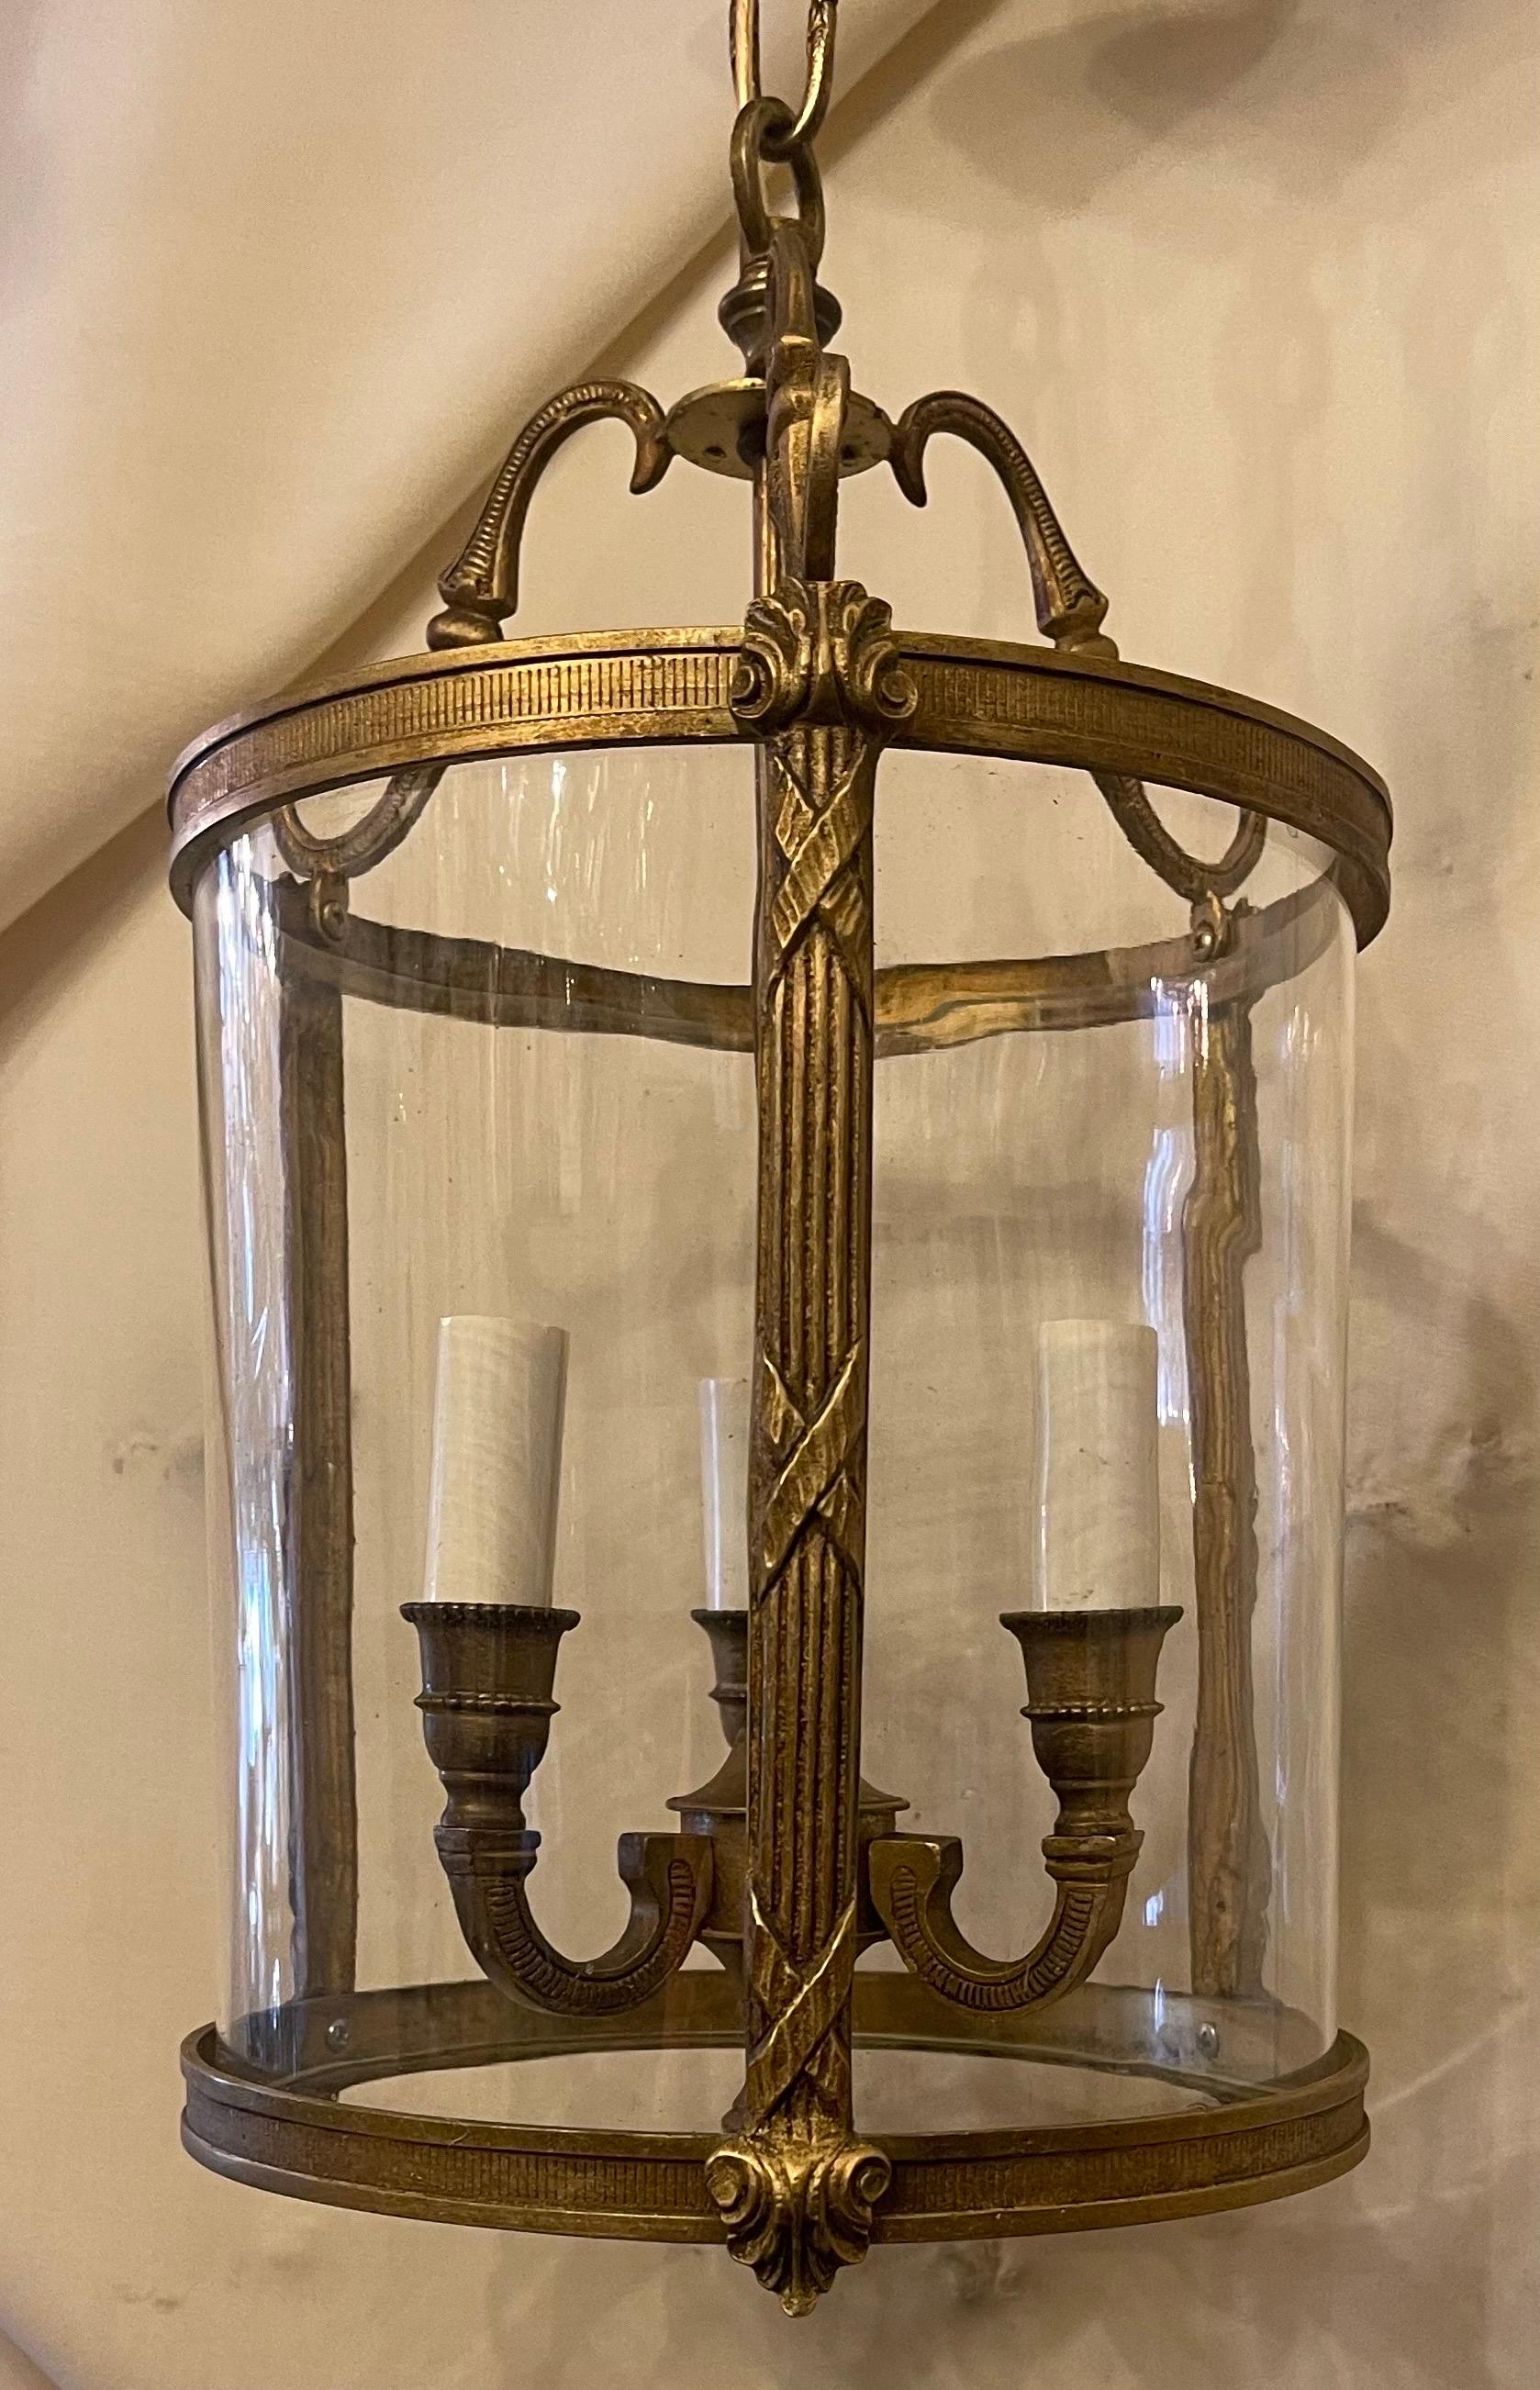 A fine gilt bronze petite readed x-pattern Louis XVI style curved blown glass lantern fixture rewired with 3 new candelabra sockets.